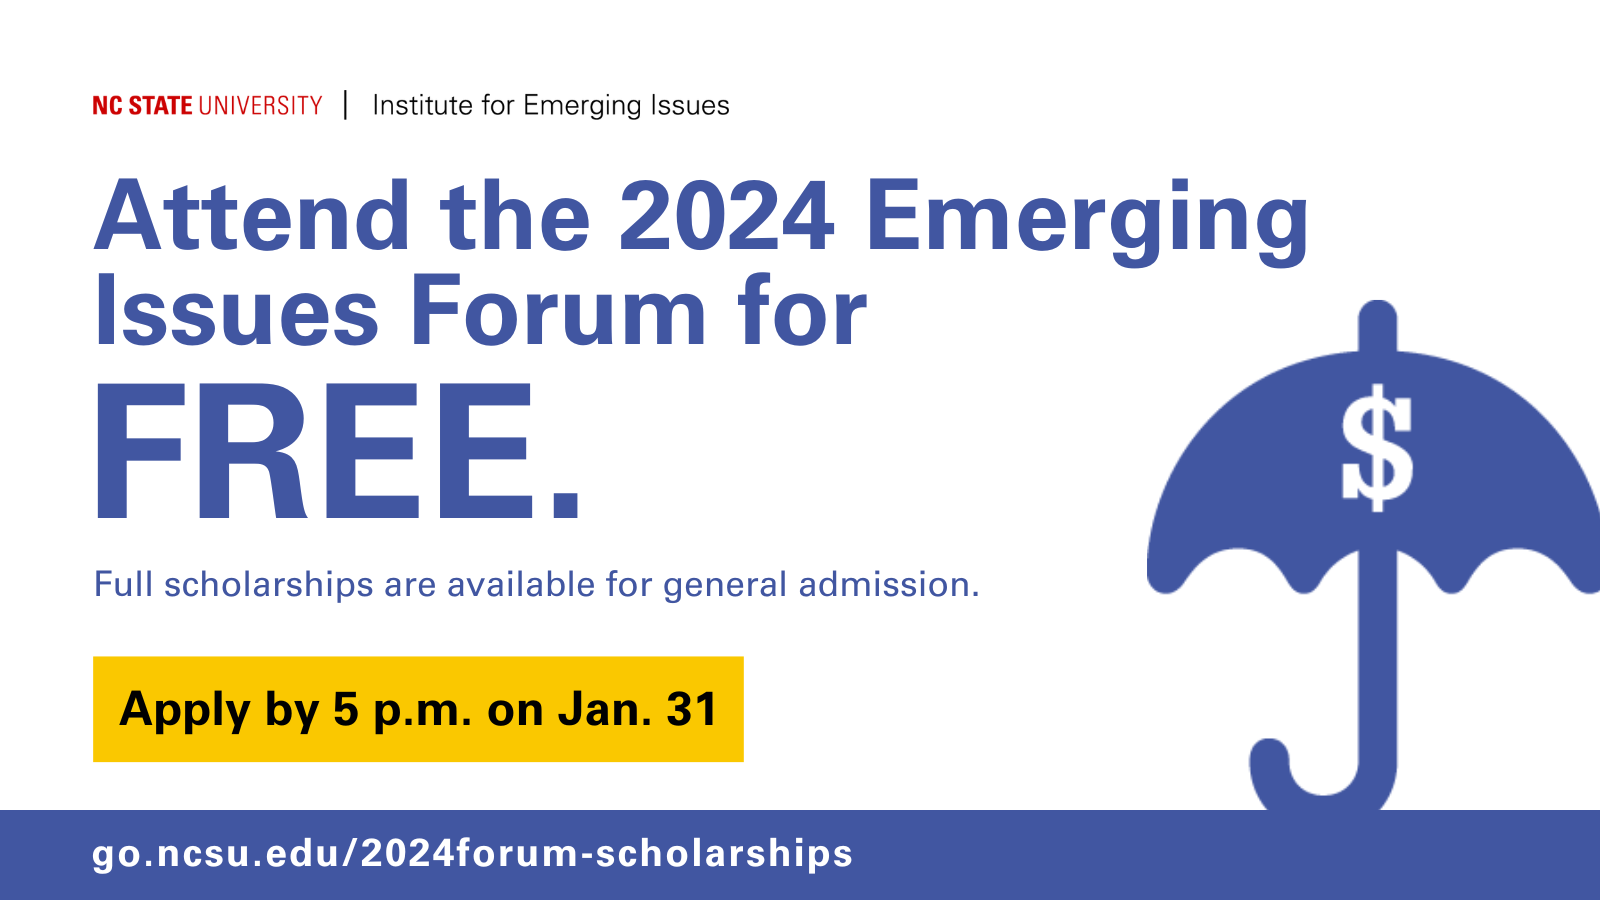 Title graphic including the language "Attend the 2024 Emerging Issues Forum for FREE. Full scholarships are available for general admission. Apply by Jan. 31, 2024. go.ncsu.edu/2024forum-scholarships.